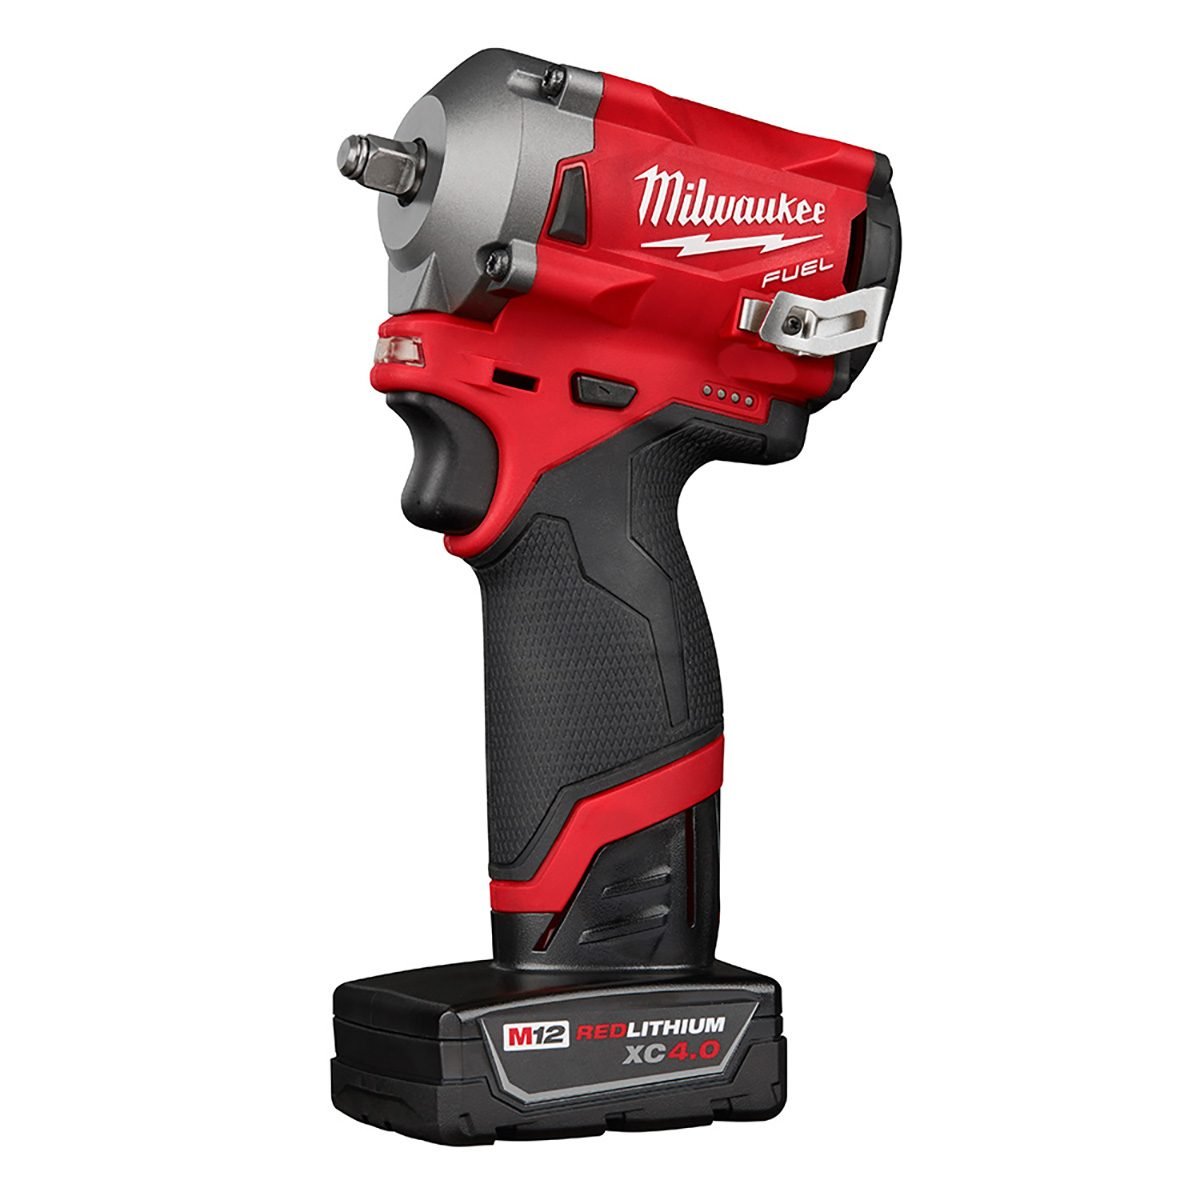 The body of Milwaukee's cordless stubby impact wrench | Construction Pro Tips